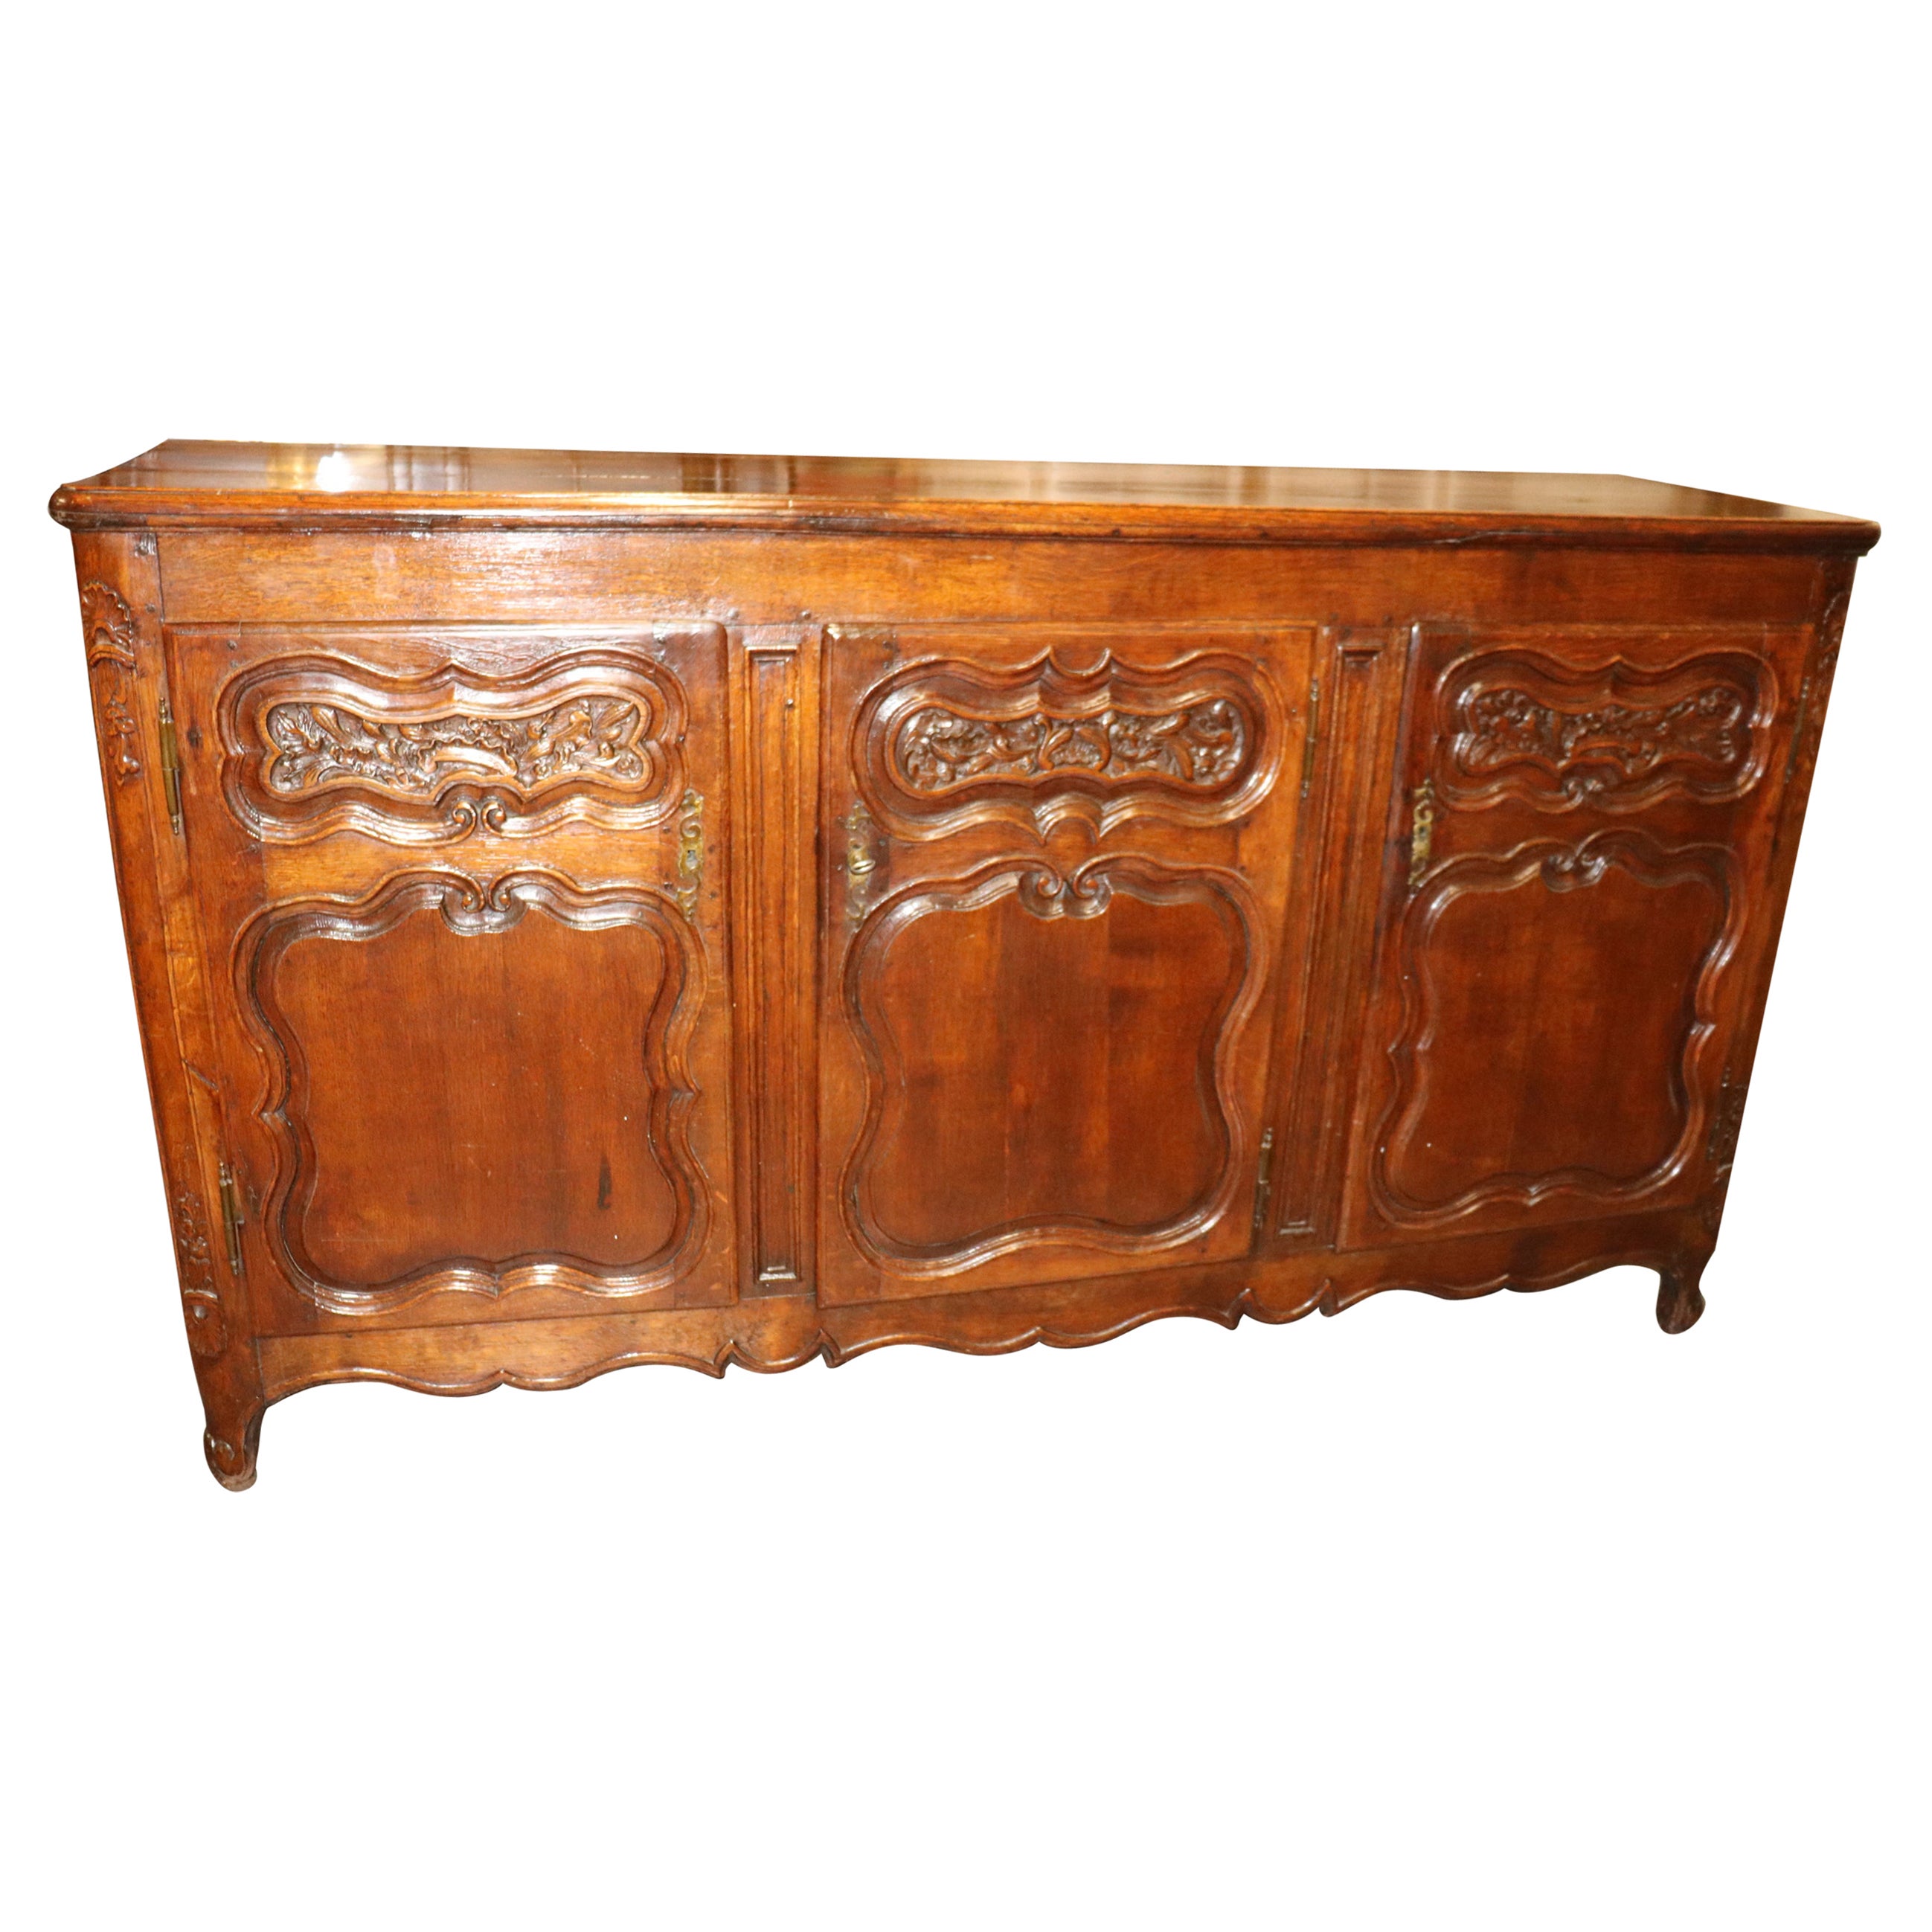 Antique 1770s Era Country French Solid Walnut Carved Sideboard Buffet For Sale